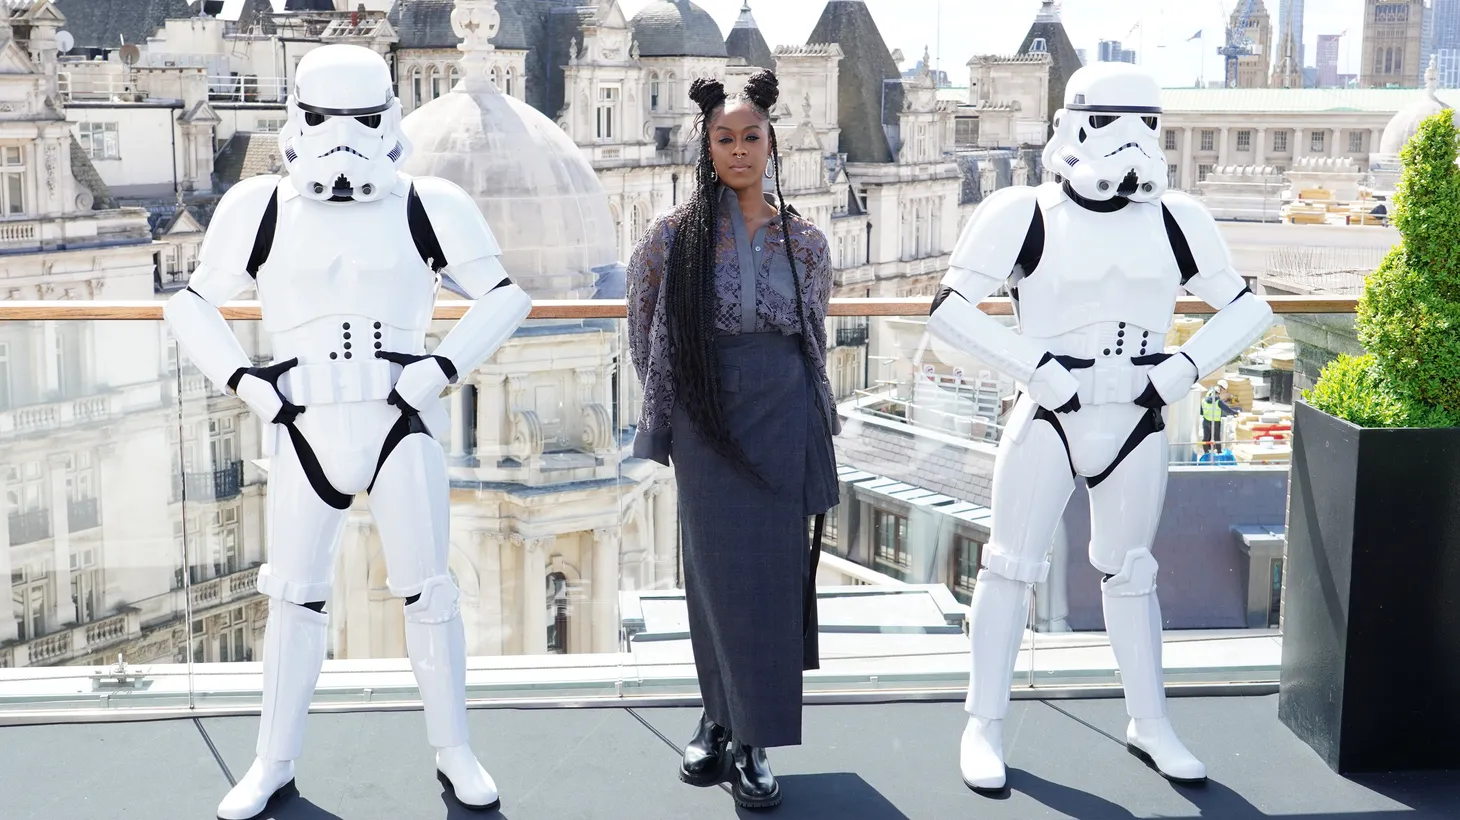 Actress Moses Ingram attends a photocall ahead of the release of the Disney+ series “Obi-Wan Kenobi,” at the Corinthia Hotel in London on May 12, 2022.